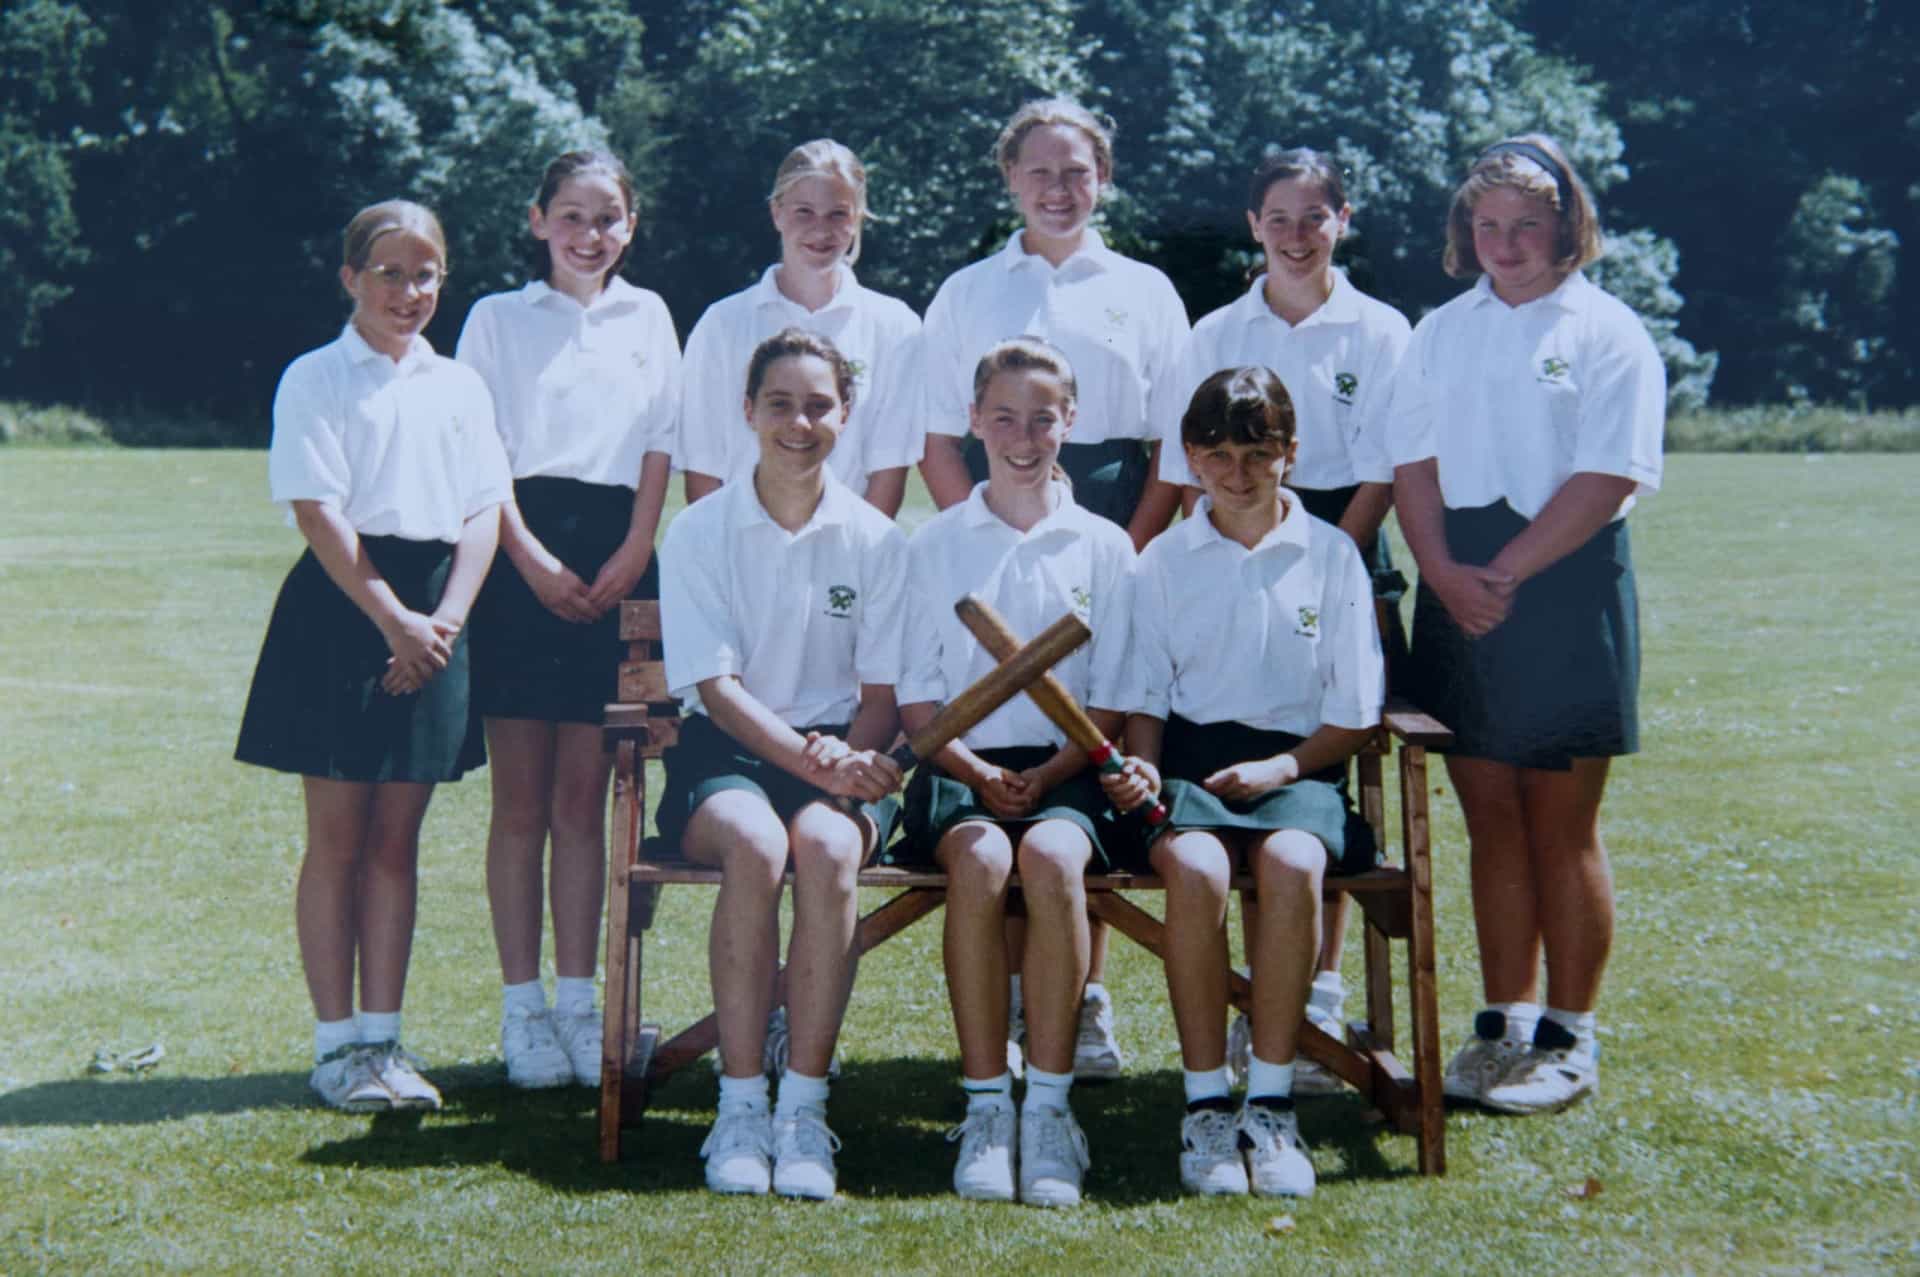 <p>The future Duchess of Cambridge, <a href="https://www.starsinsider.com/celebrity/506751/the-many-possible-professions-of-kate-middleton" rel="noopener">Kate Middleton</a> (front row, left) is pictured at St Andrew's School in Pangbourne, Berkshire, England c. 1991 in a sports team photograph.</p>